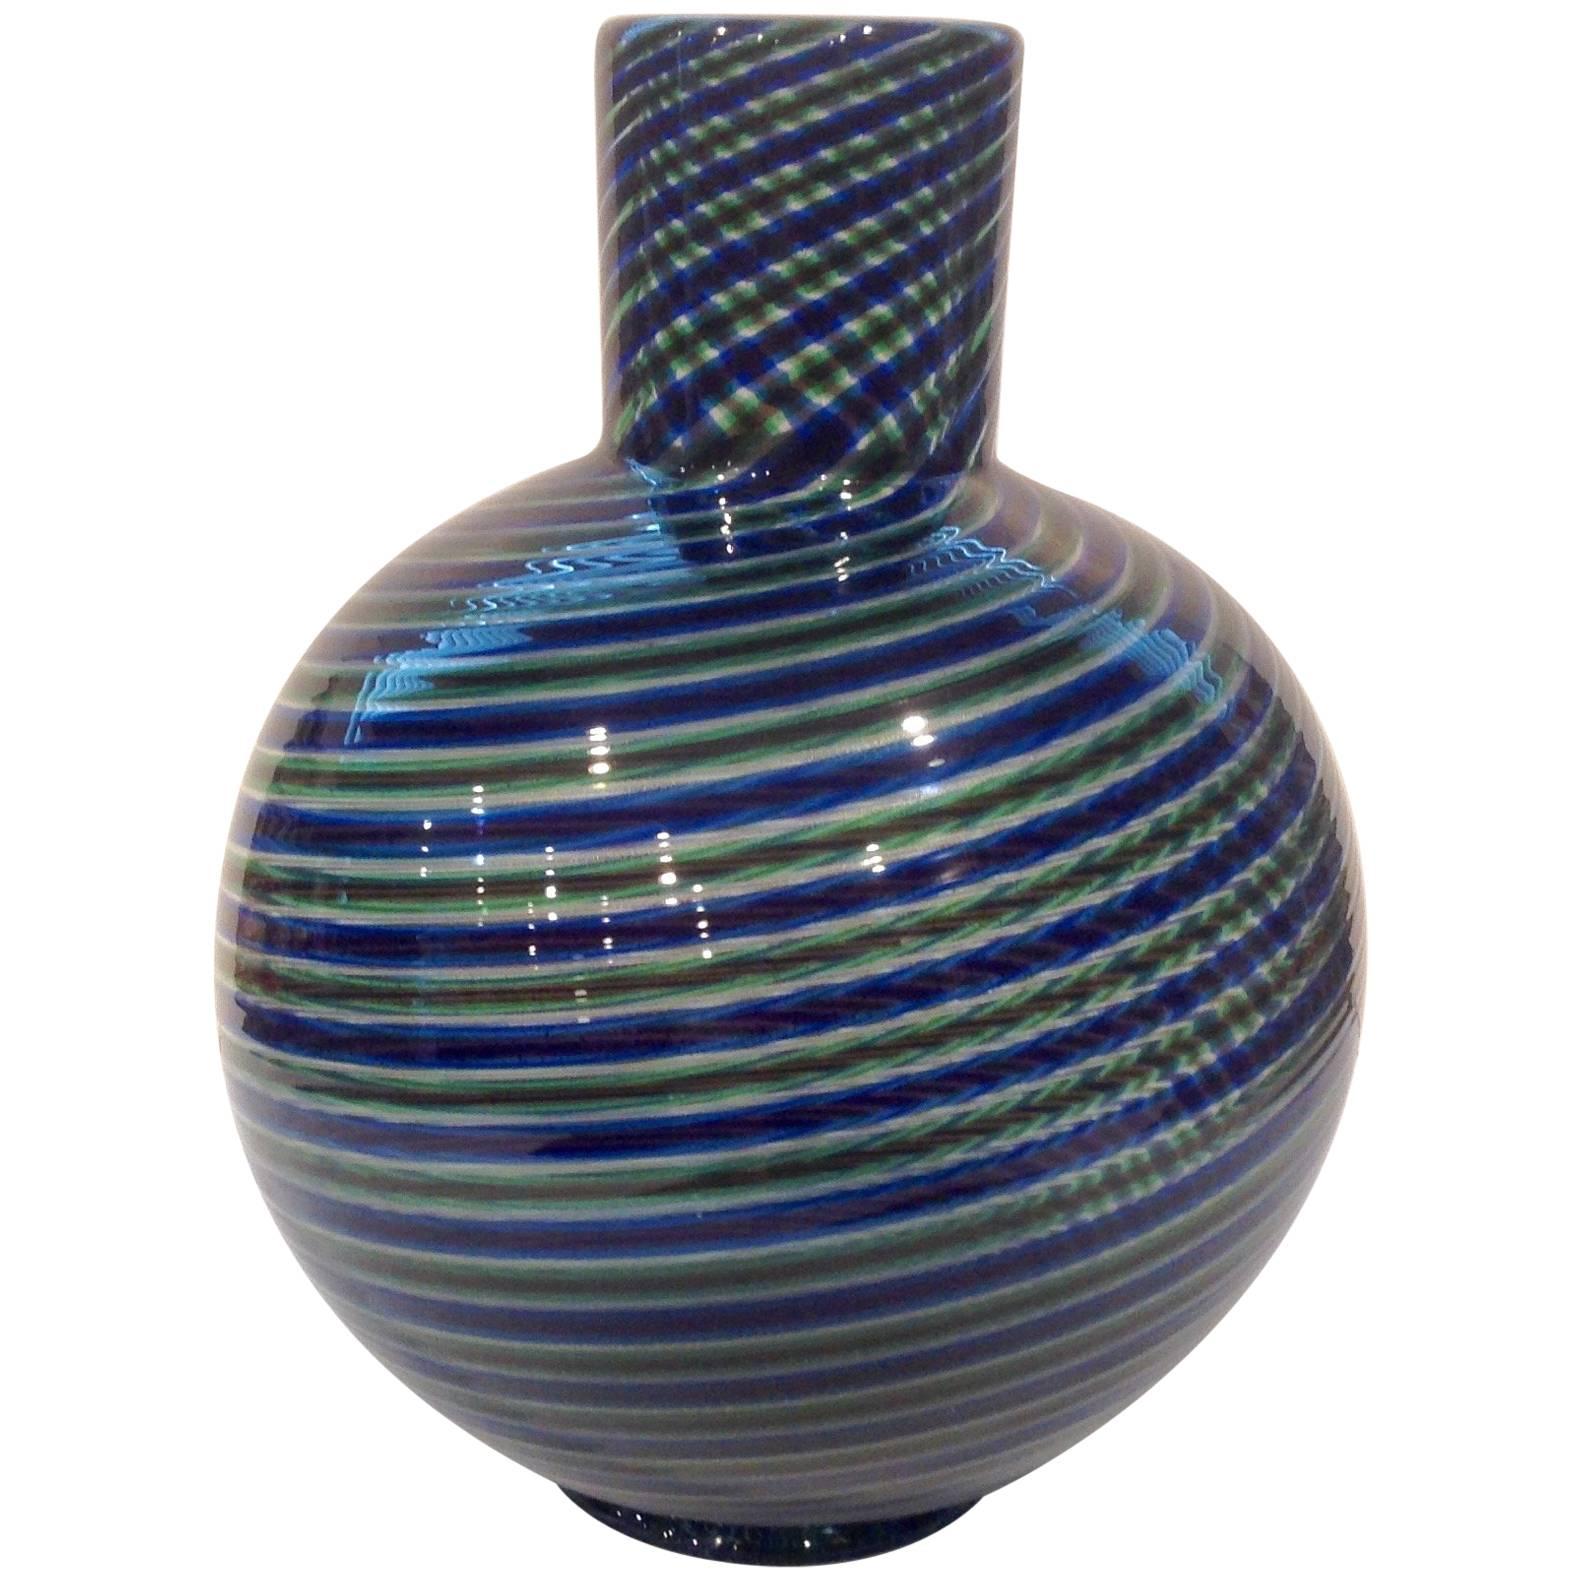 Signed Vibrant Murano Vase by Barovier and Toso